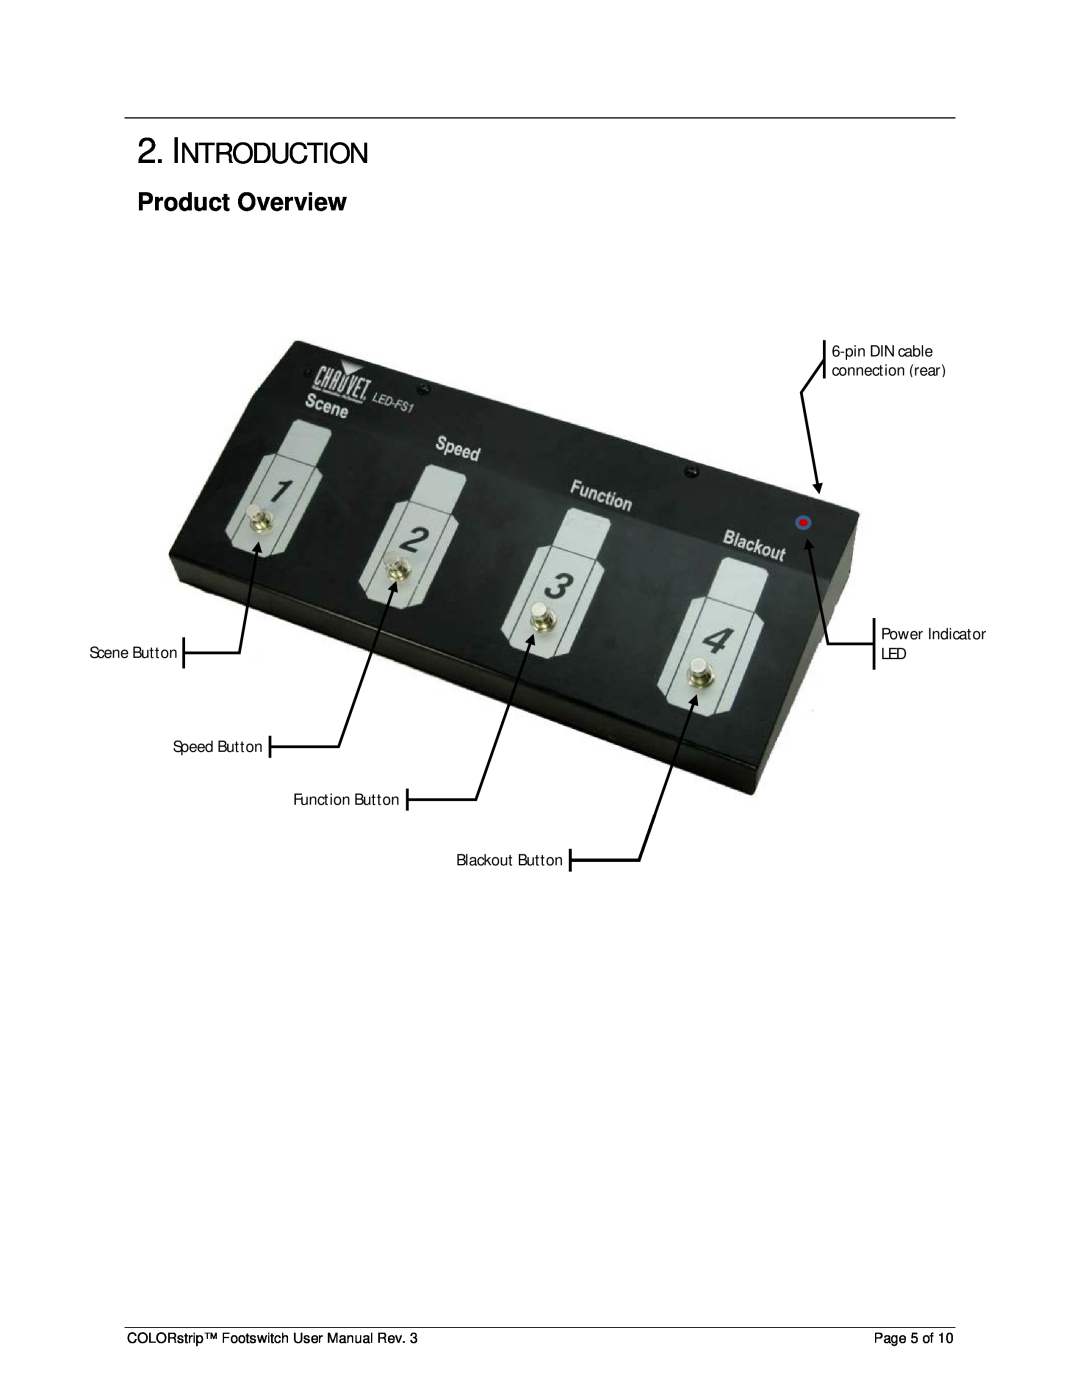 Chauvet LED-FS1 Introduction, Product Overview, pin DIN cable connection rear, Scene Button, Power Indicator LED 